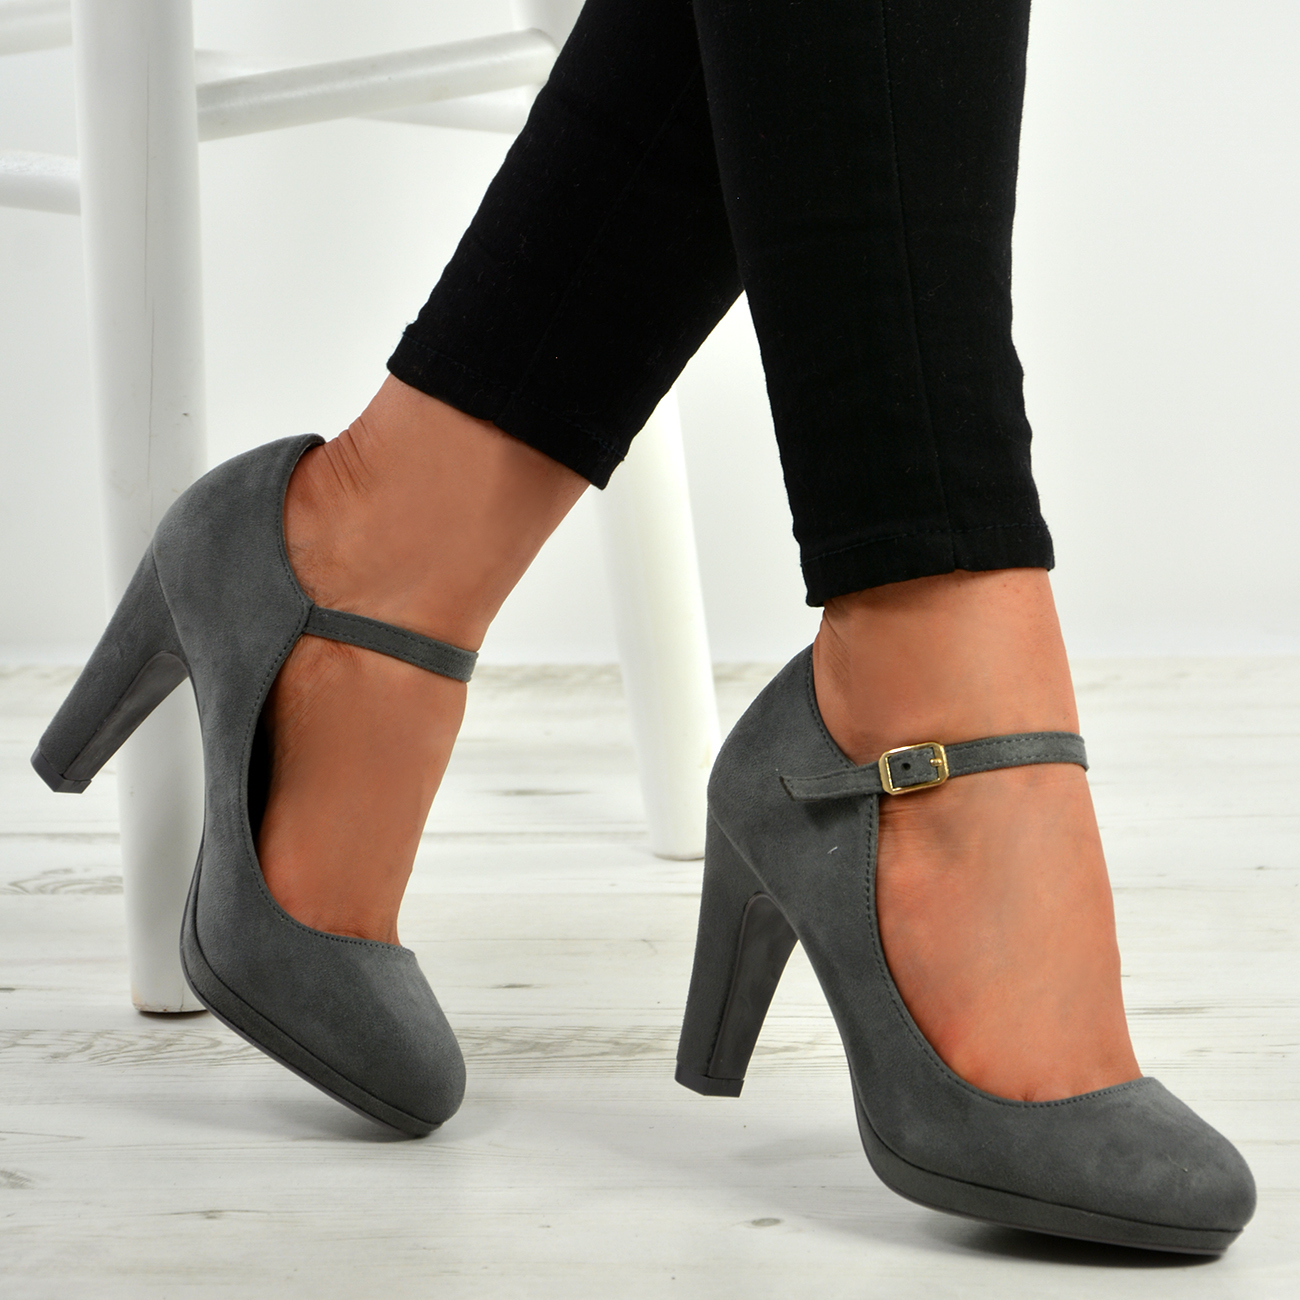 New Spring Big size 32-43 Women Sexy Suede Mary Jane Ankle 